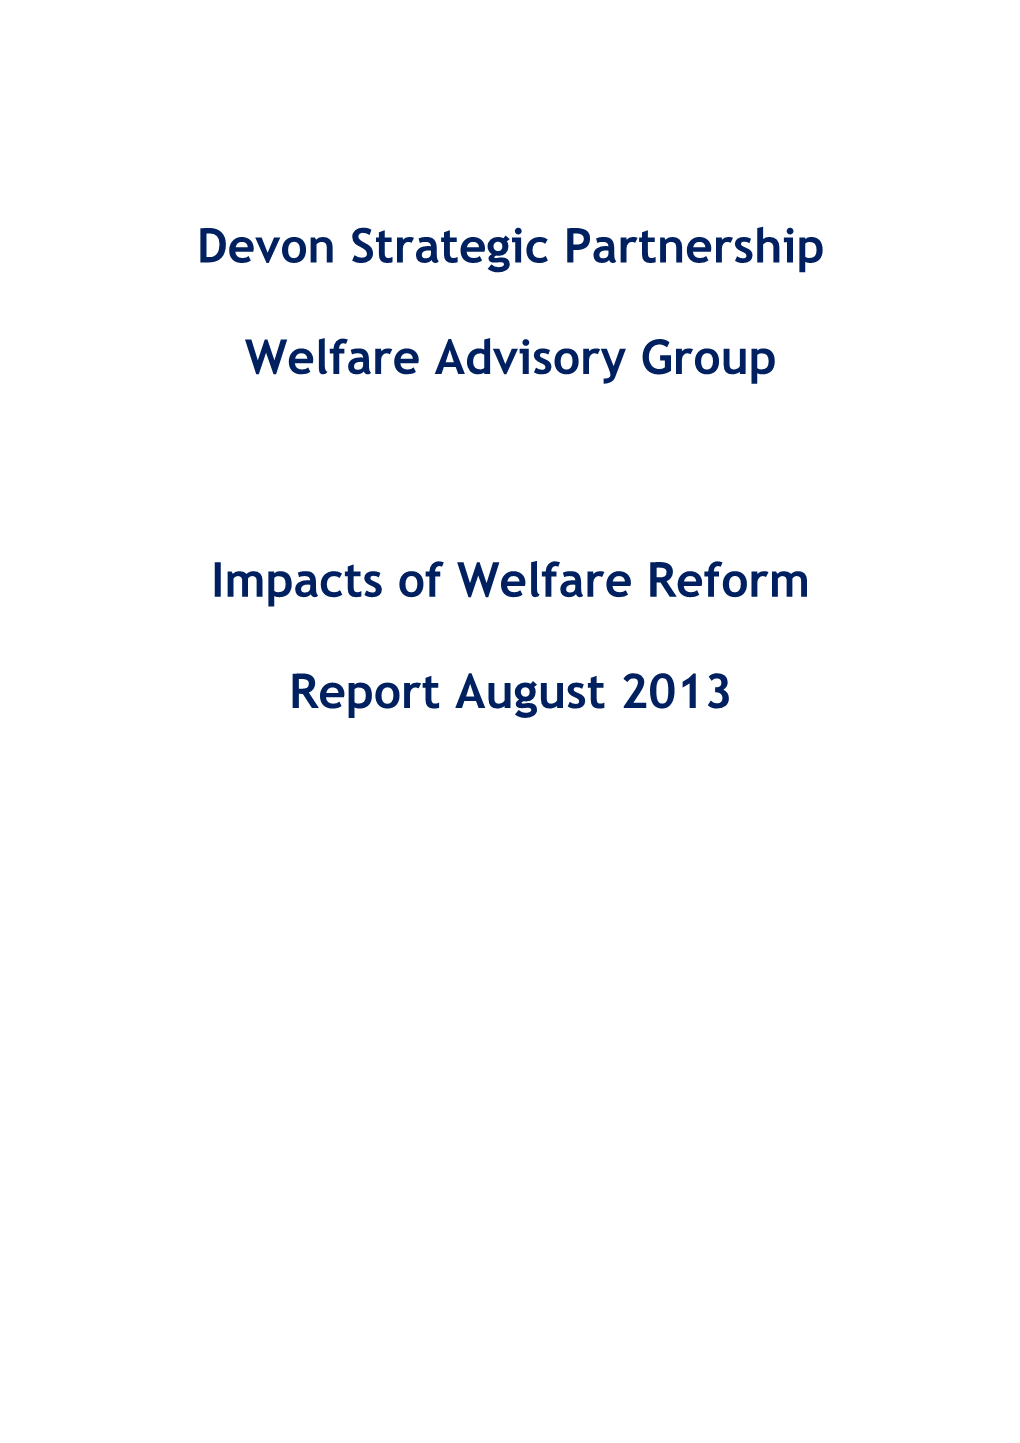 Impacts of Welfare Reform